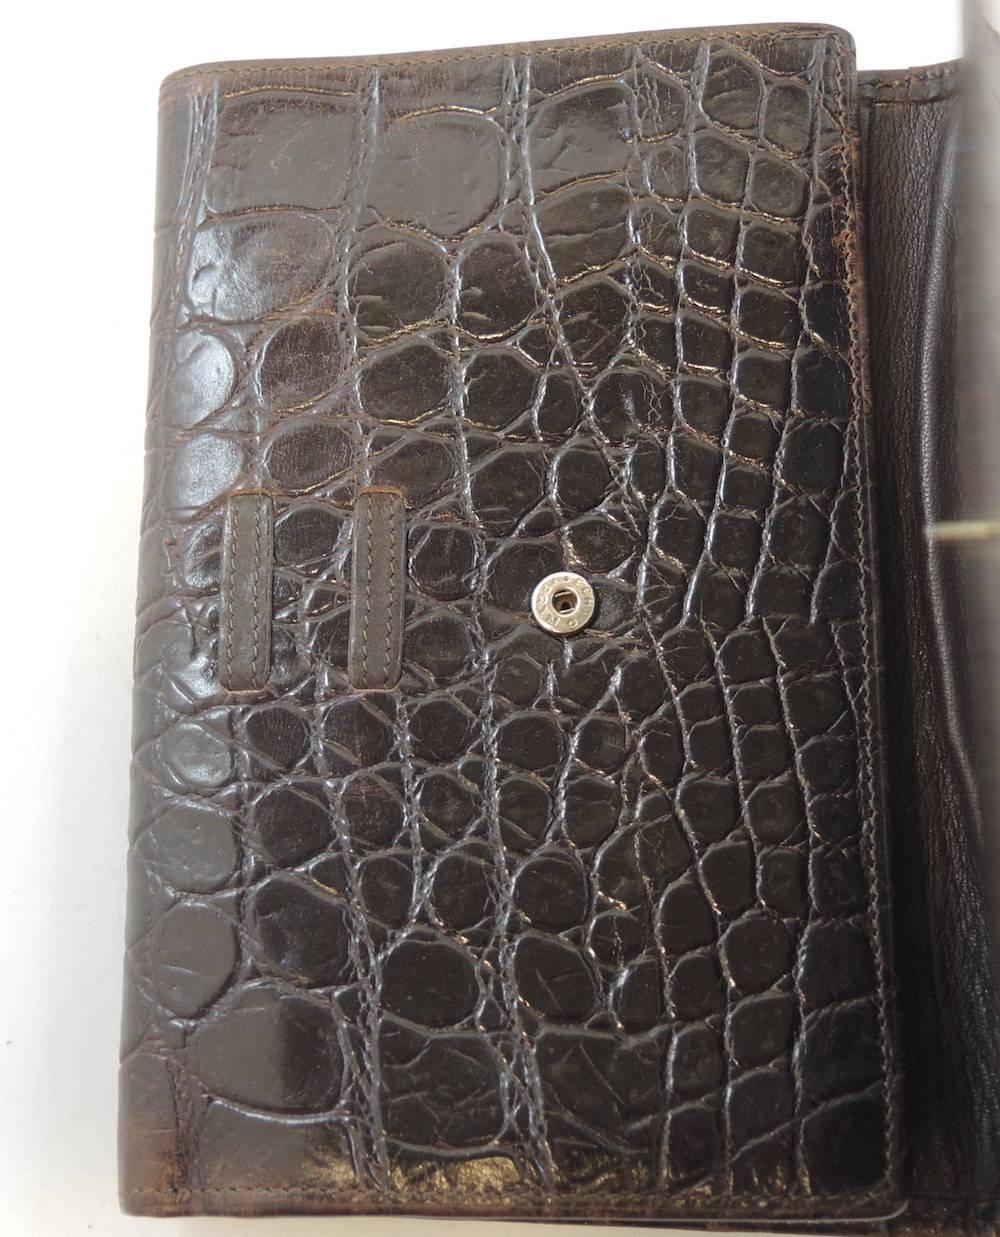 This Gianni Versace crocodile embossed wallet is made of luscious brown leather. The flap has a bow in the front and a snap in closure. The inside opens up to a tri fold style. It has two large bill slots, a coin pocket and room for credit cards. It